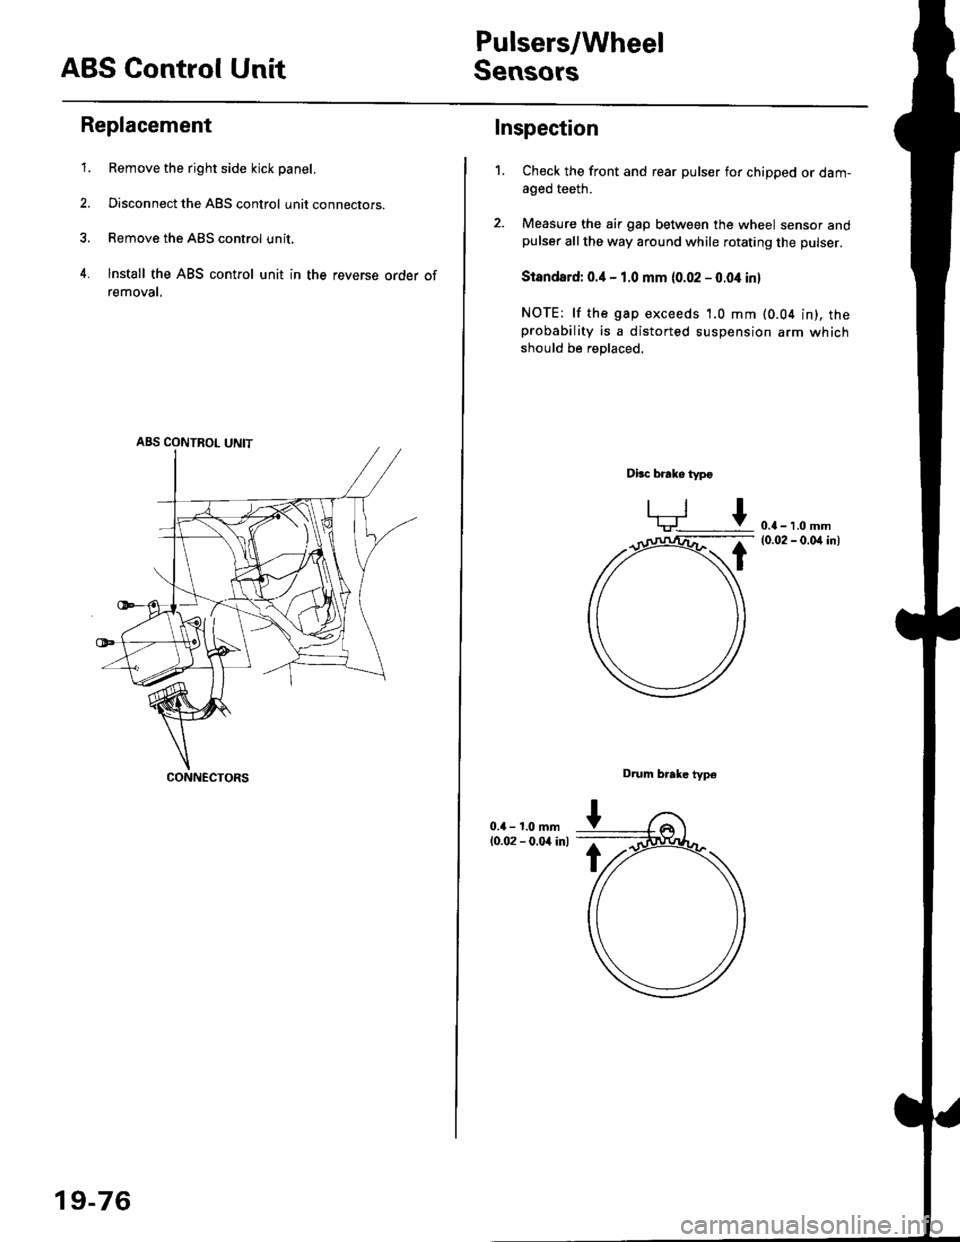 HONDA CIVIC 1997 6.G Workshop Manual ABS Control Unit
Pulsers/Wheel
Sensors
Replacement
1. Remove the right side kick panel.
2. Disconnect the ABS control unit connecrors.
3. Remove the ABS control unit,
4. lnstall the ABS control unit i